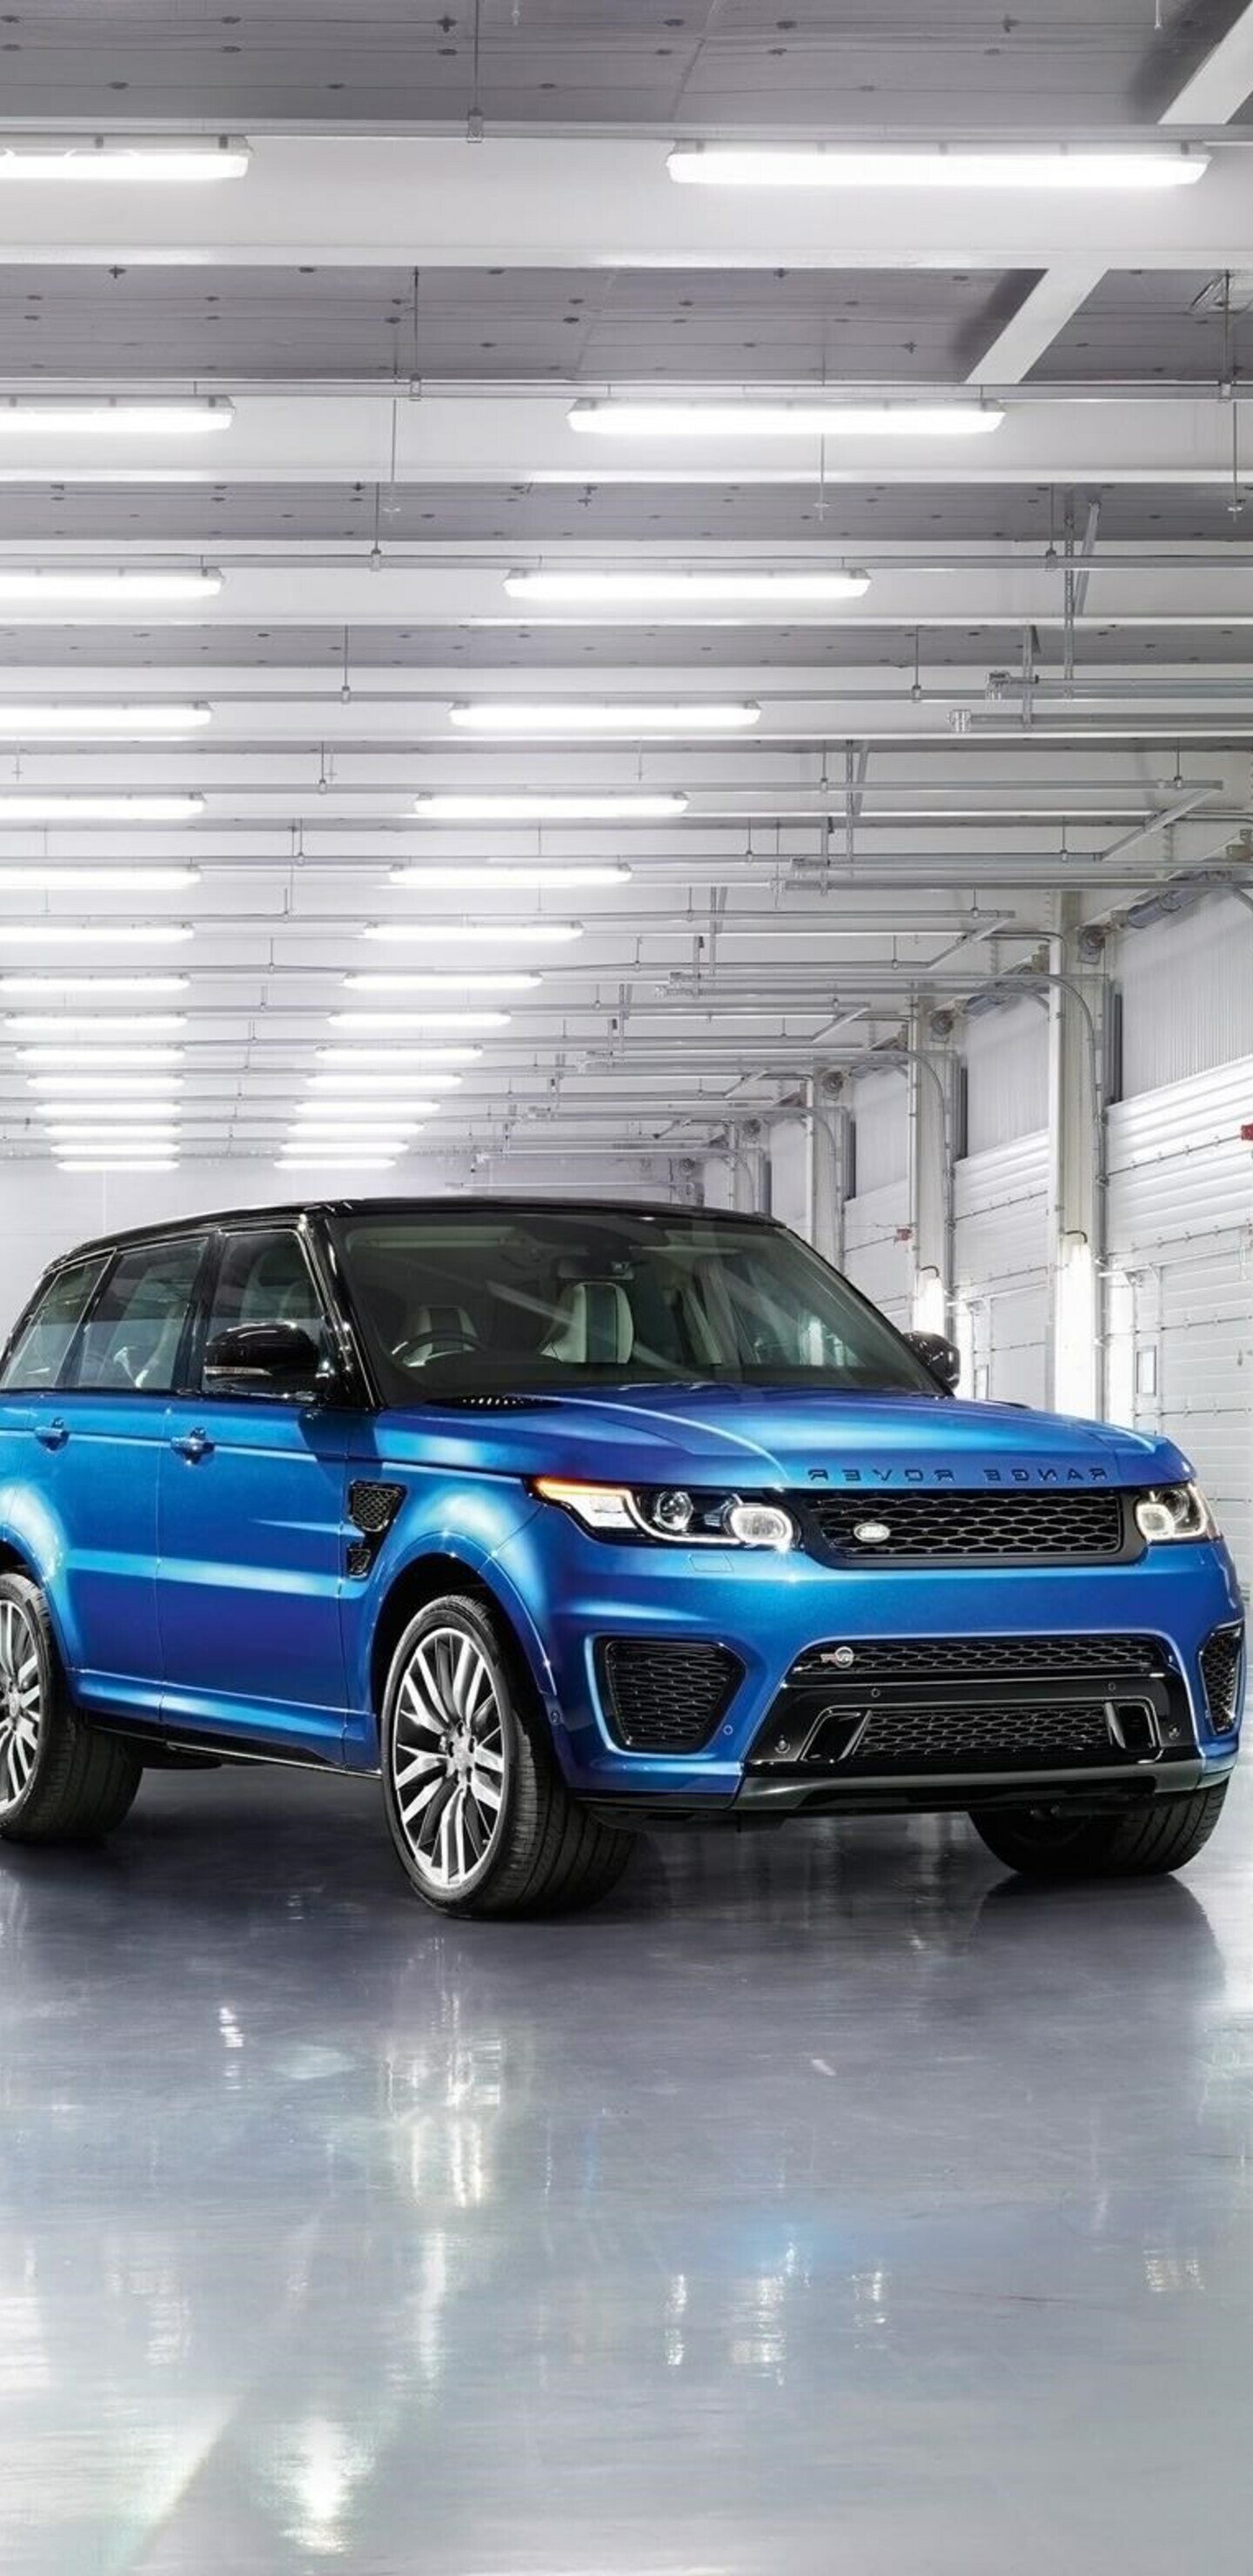 Range Rover: Land Rover debuted the Model Sport in 2004. 1440x2960 HD Background.